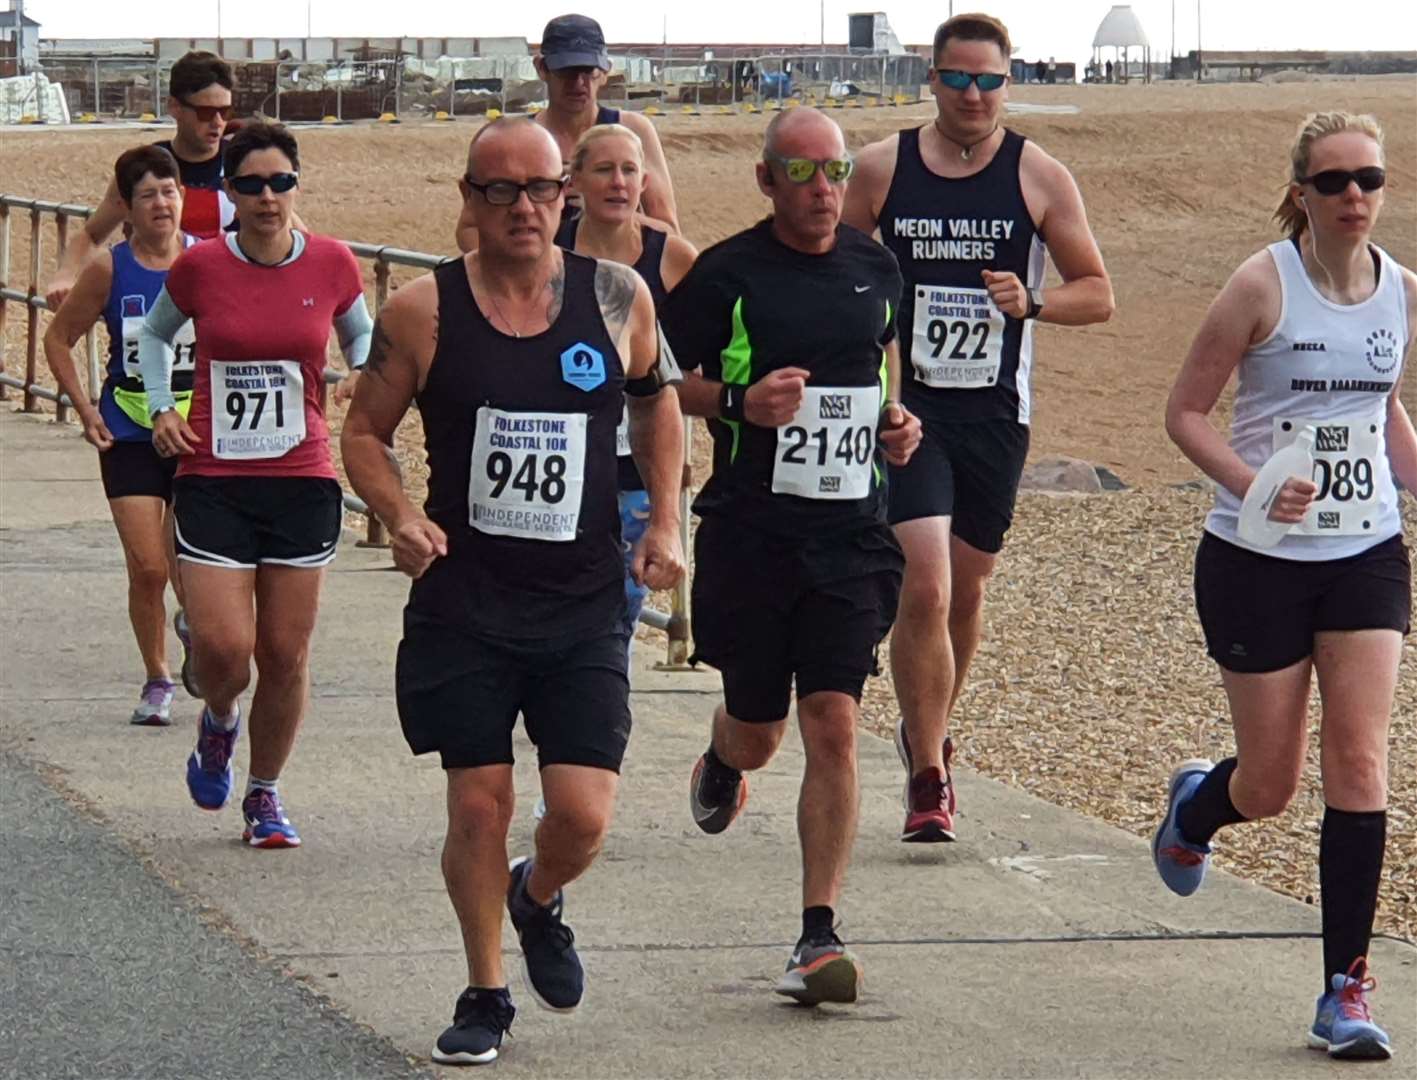 Elliot Rawlings (948) of Lonely Goat Running Club gets into his stride.